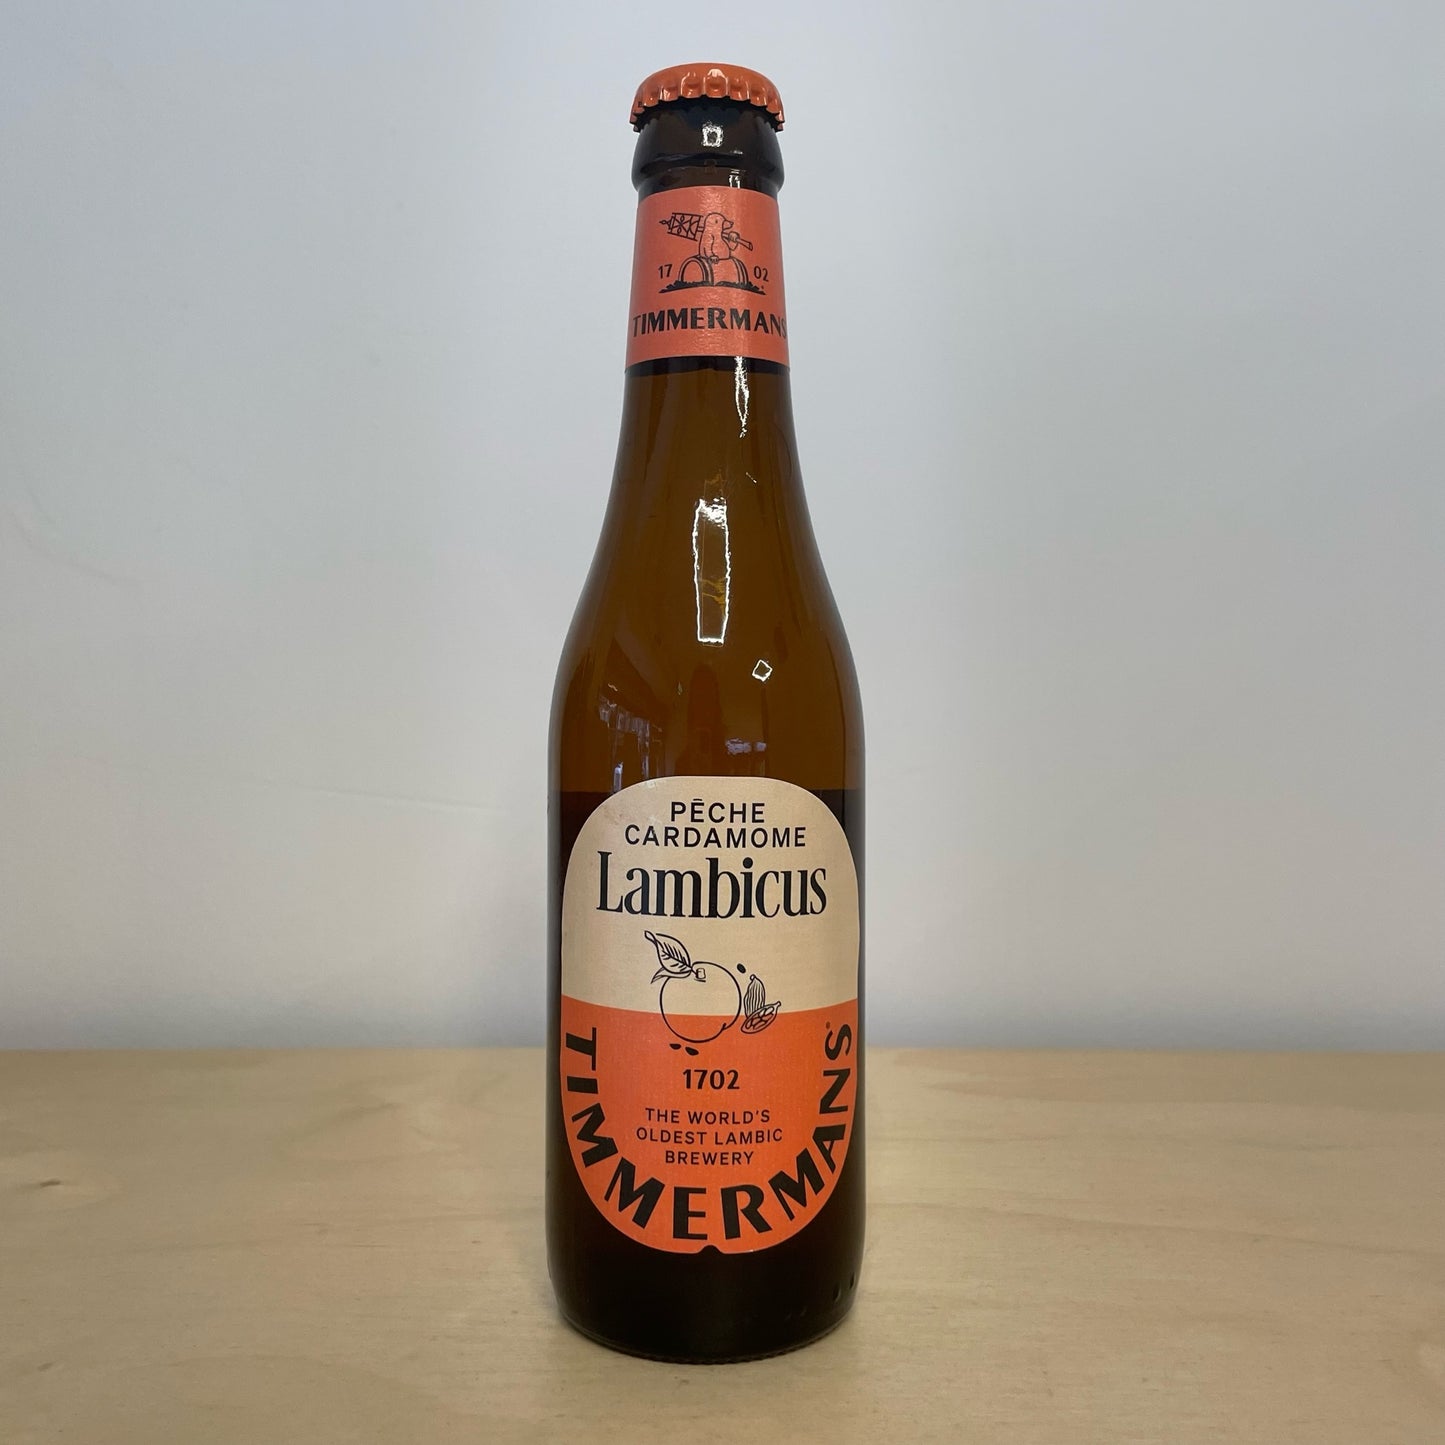 Timmermans Lambicus Pêche Cardamome (330ml Bottle)